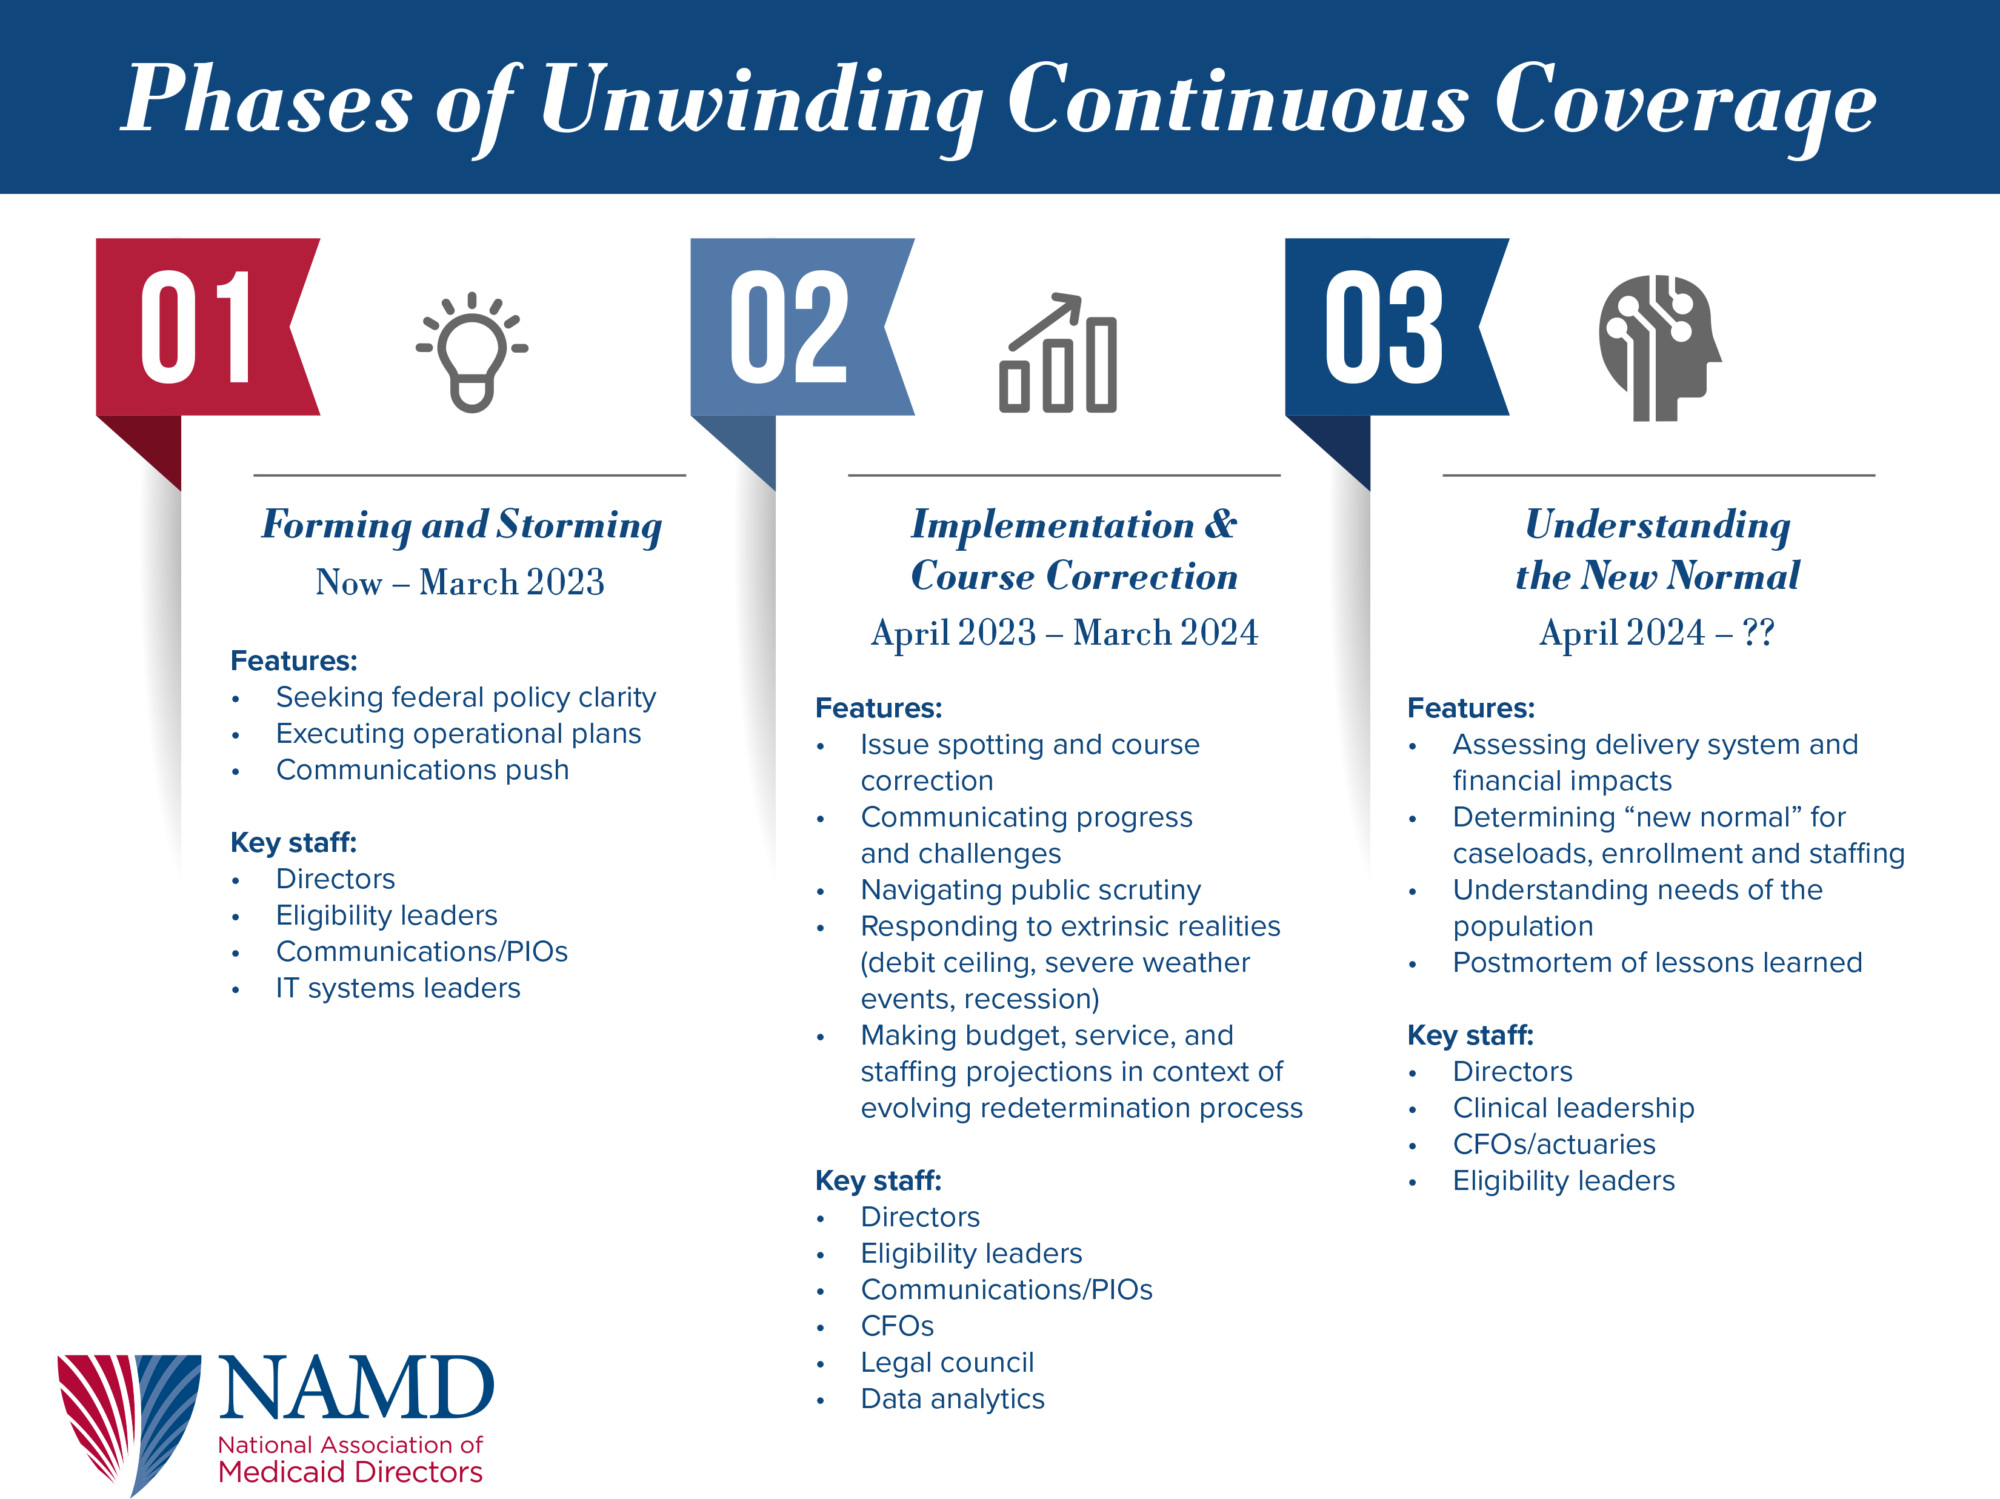 The Phases of Unwinding A Framework for the End of Continuous Coverage